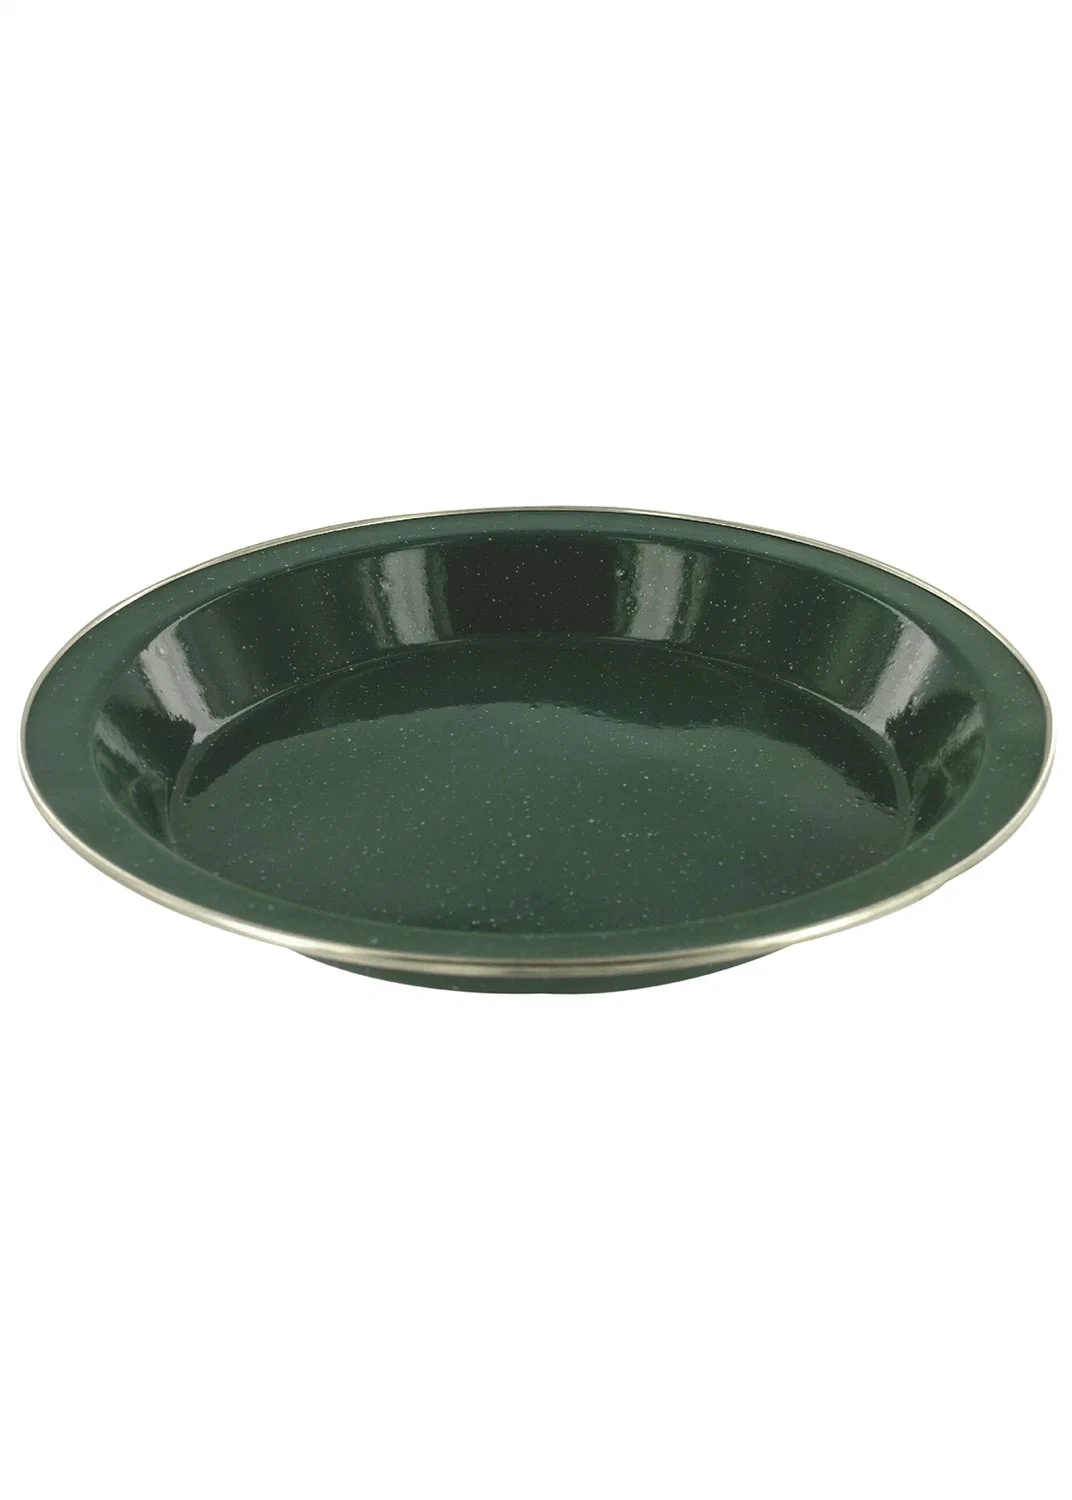 Enamel Product in Kitchenware, Furniture